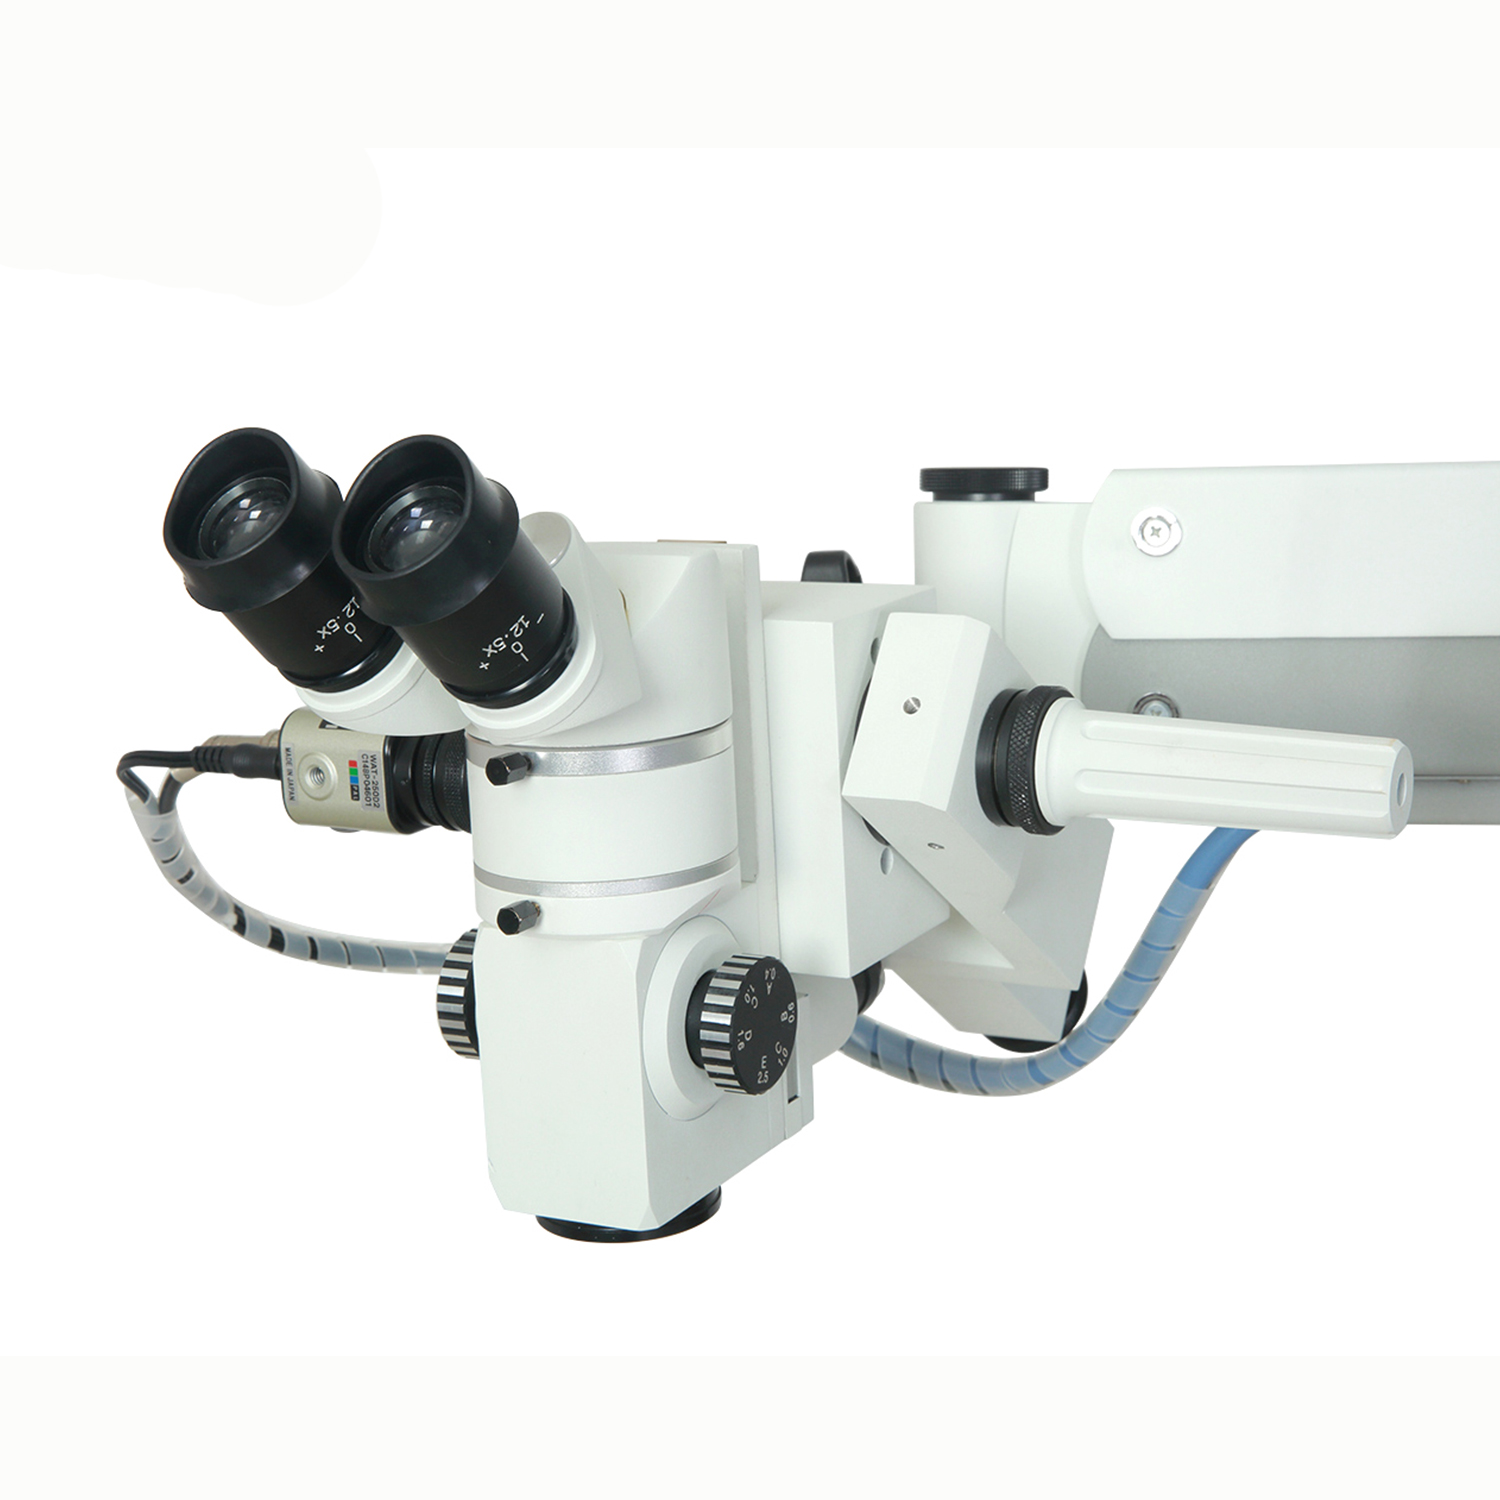 Multipurpose Dental Surgical Microscope III With Video Recording Function Featured Image